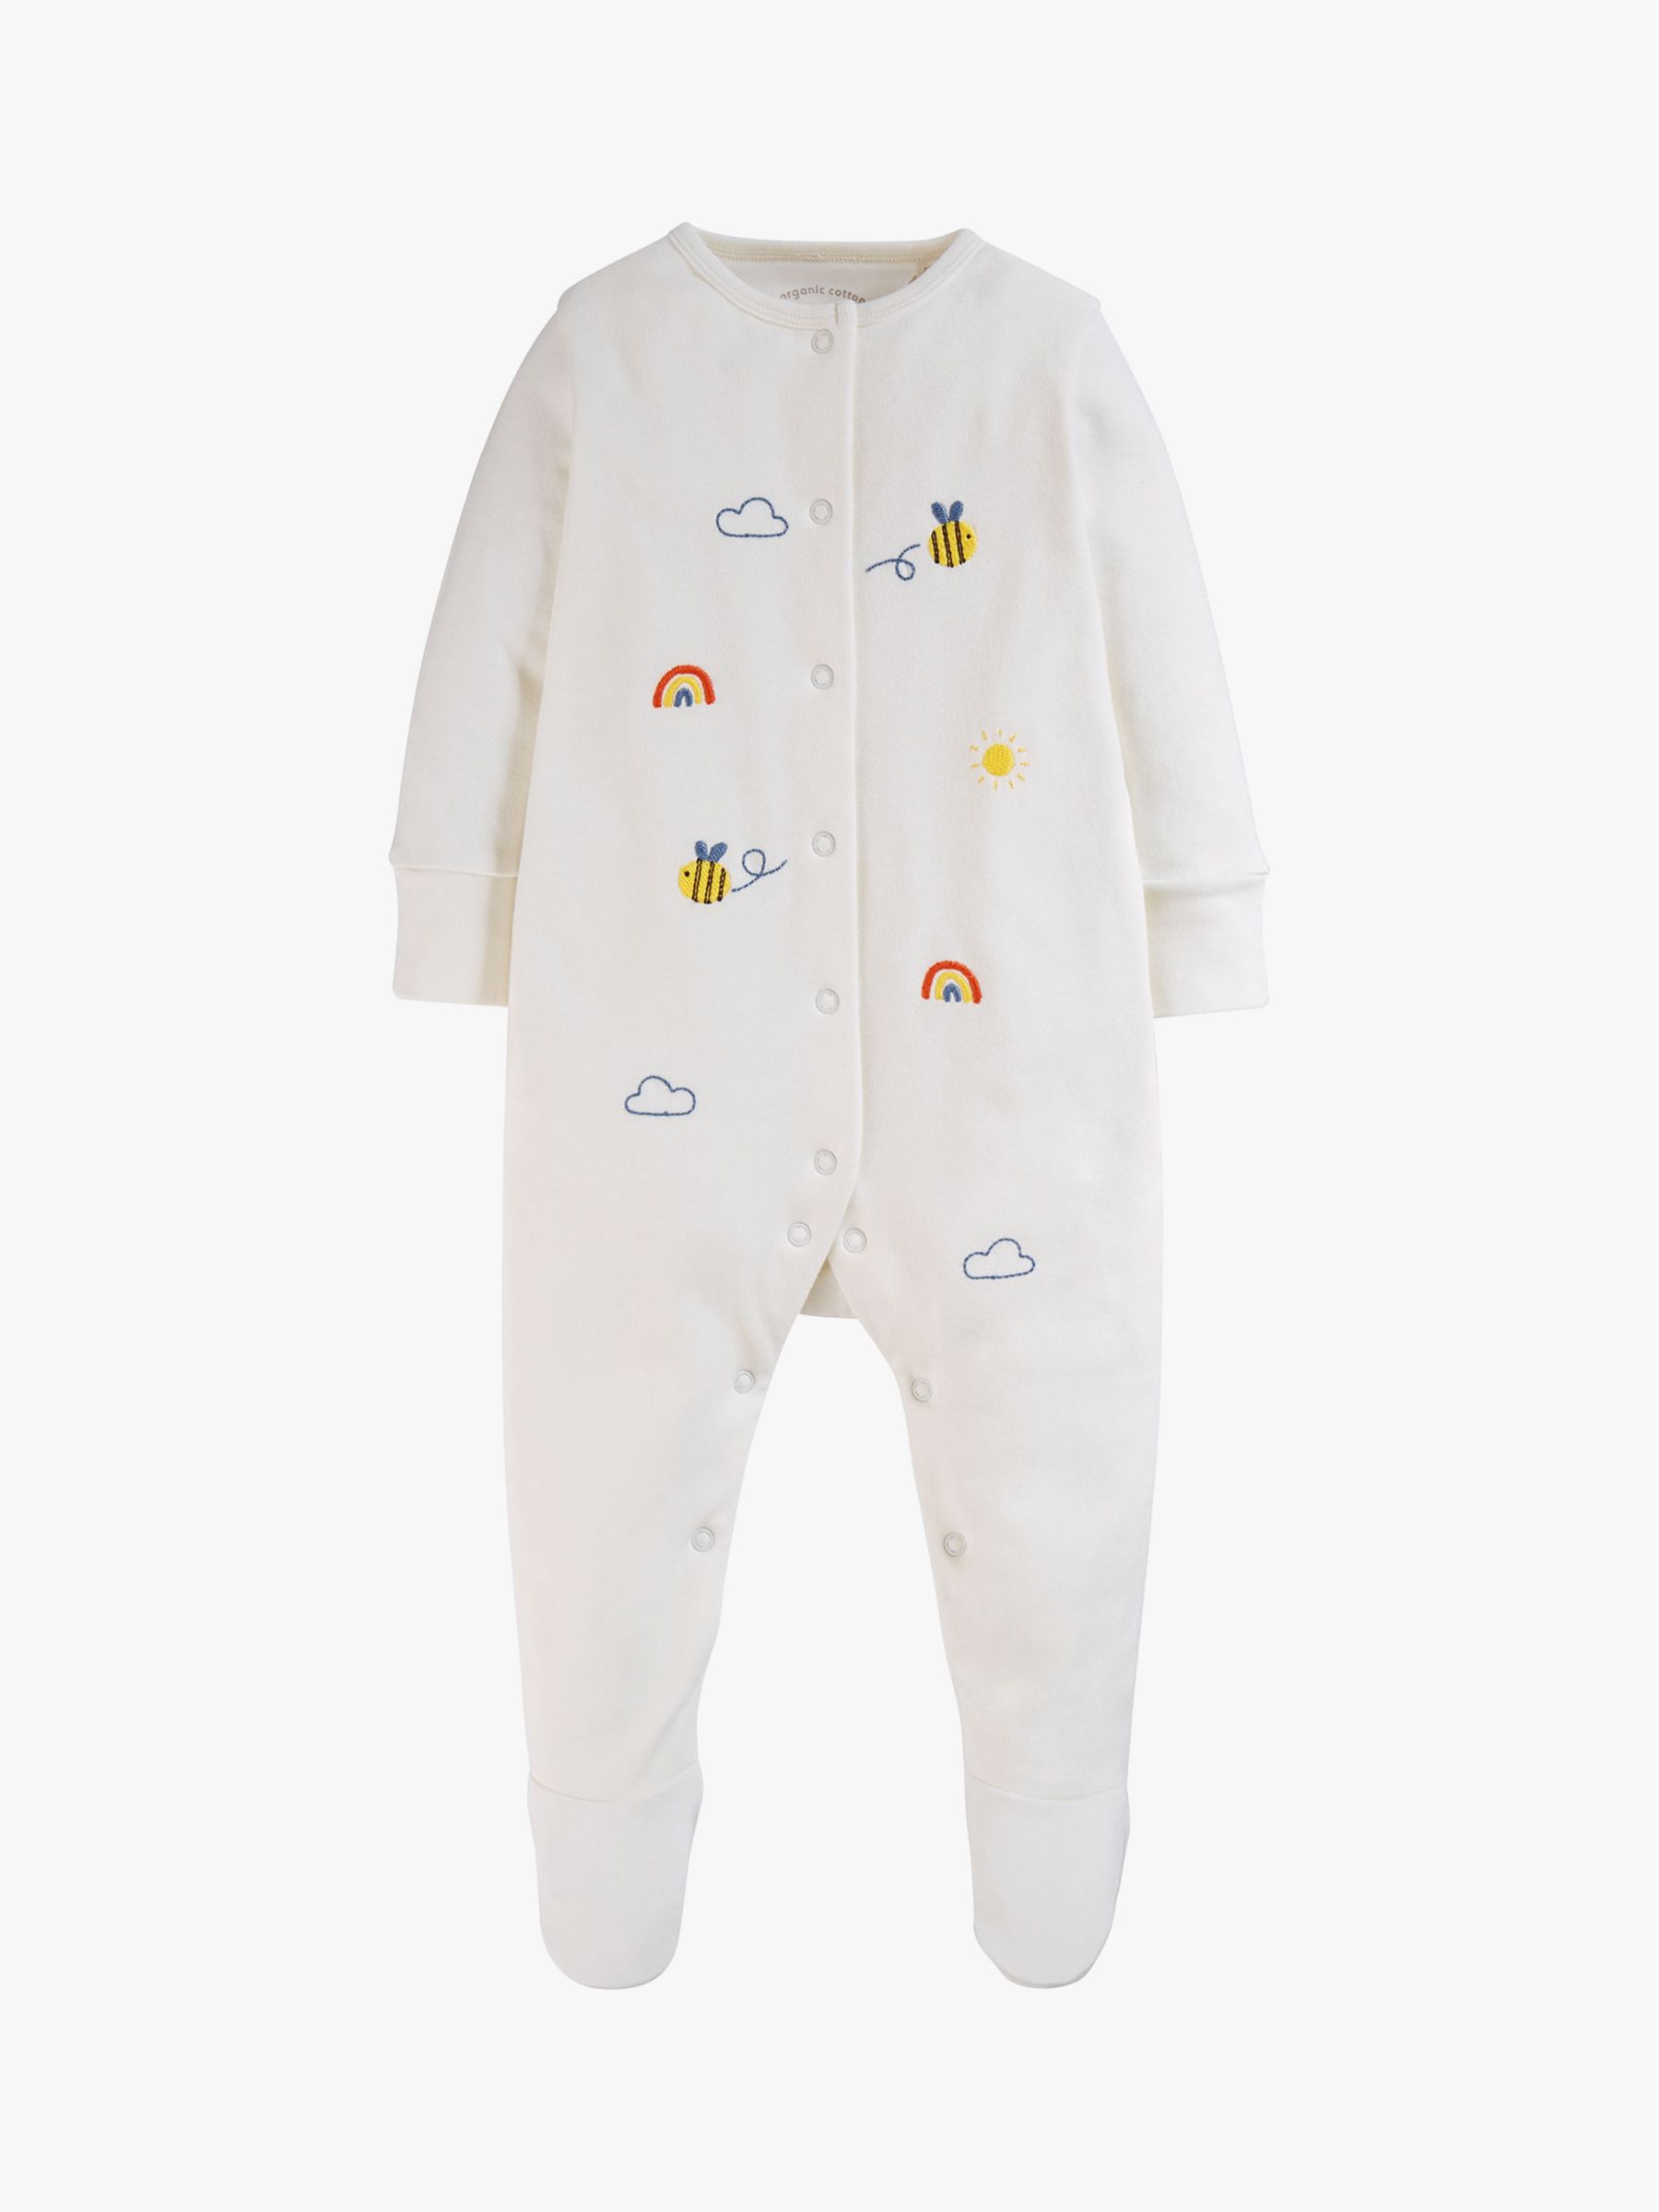 Frugi Baby Buzzy Bee Organic Cotton Embroidered Babygrow, White/Multi, 12-18 months